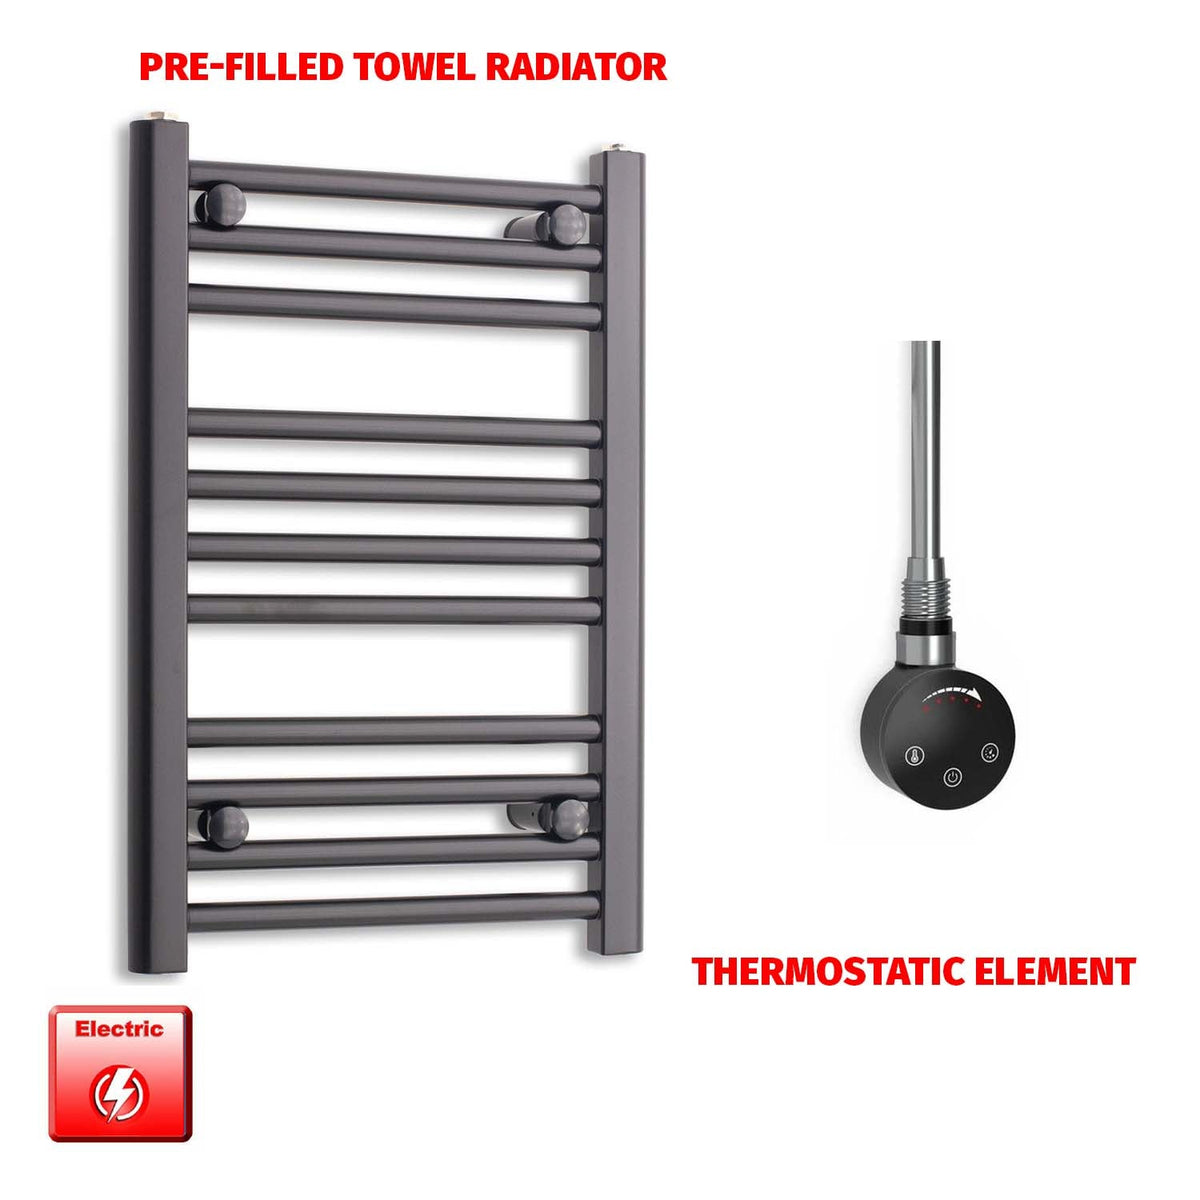 800 x 450 Flat Black Pre-Filled Electric Heated Towel Radiator HTR Smart Thermostatic